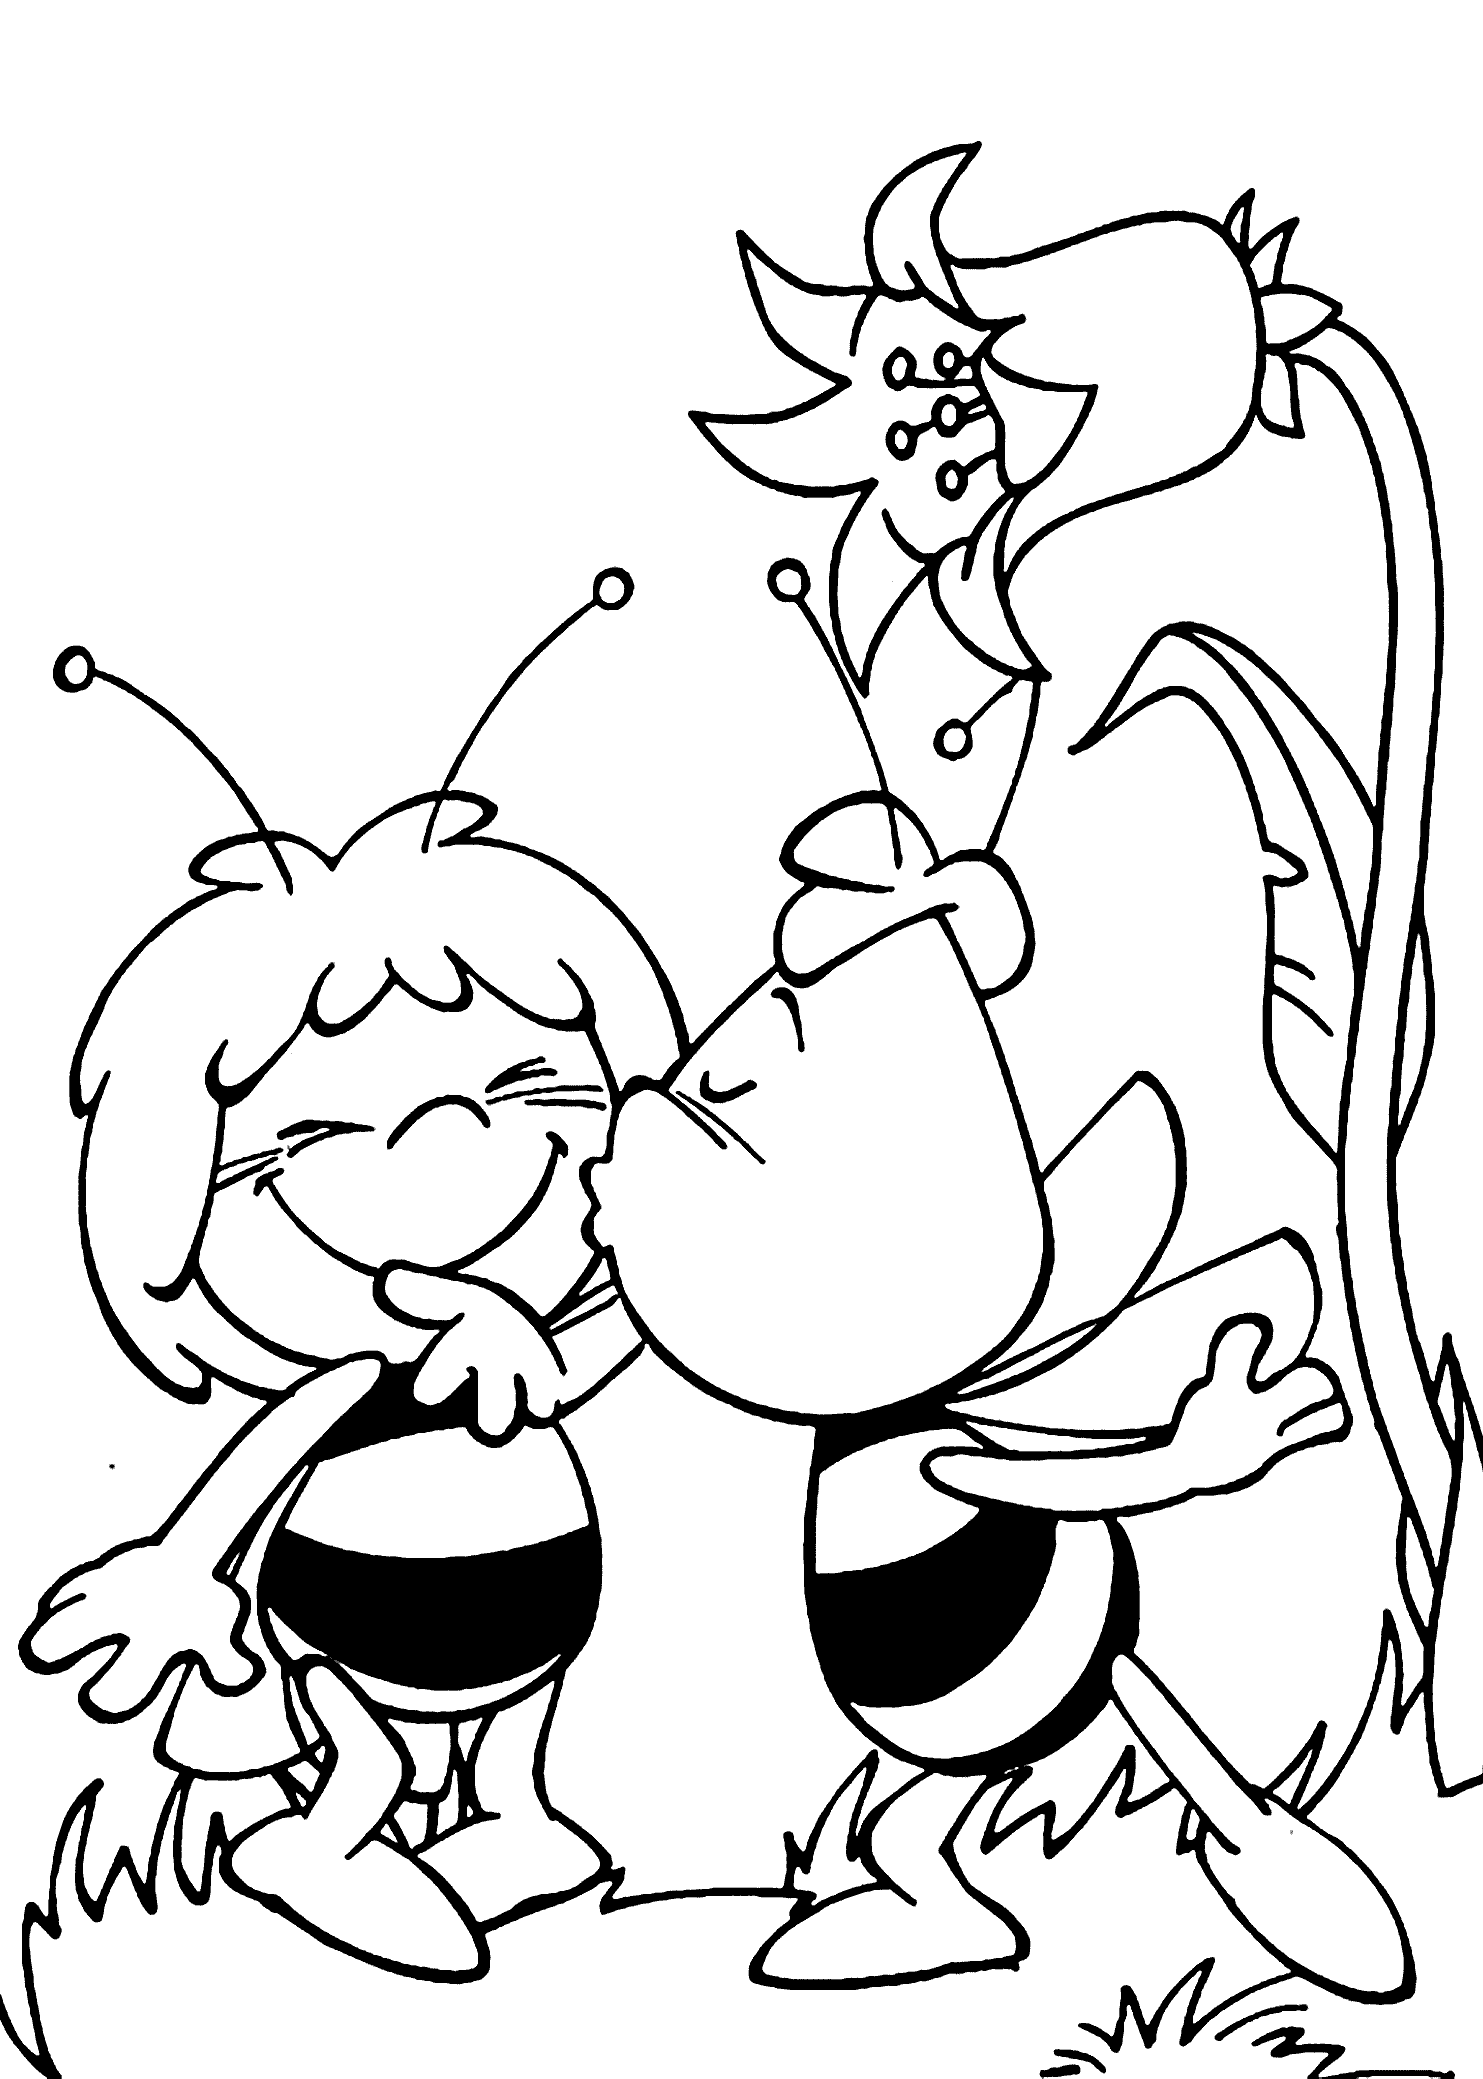 Maya The Bee Coloring Pages For Kids Kiss Printable Free Bee Coloring Pages Cartoon C